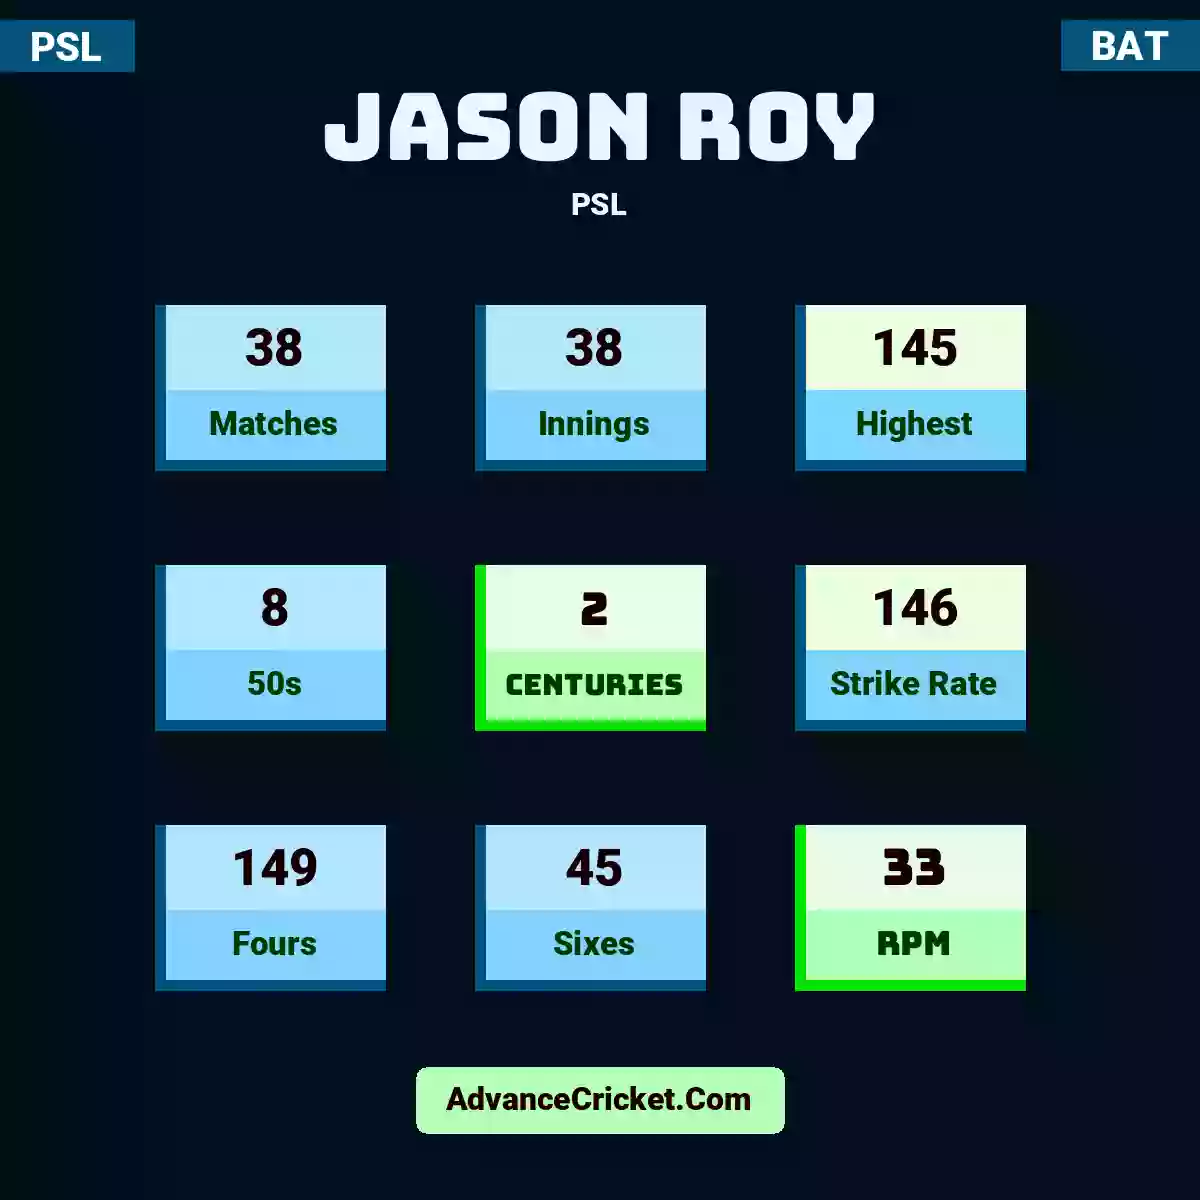 Jason Roy PSL , Jason Roy played 38 matches, scored 145 runs as highest, 8 half-centuries, and 2 centuries, with a strike rate of 146. J.Roy hit 149 fours and 45 sixes, with an RPM of 33.